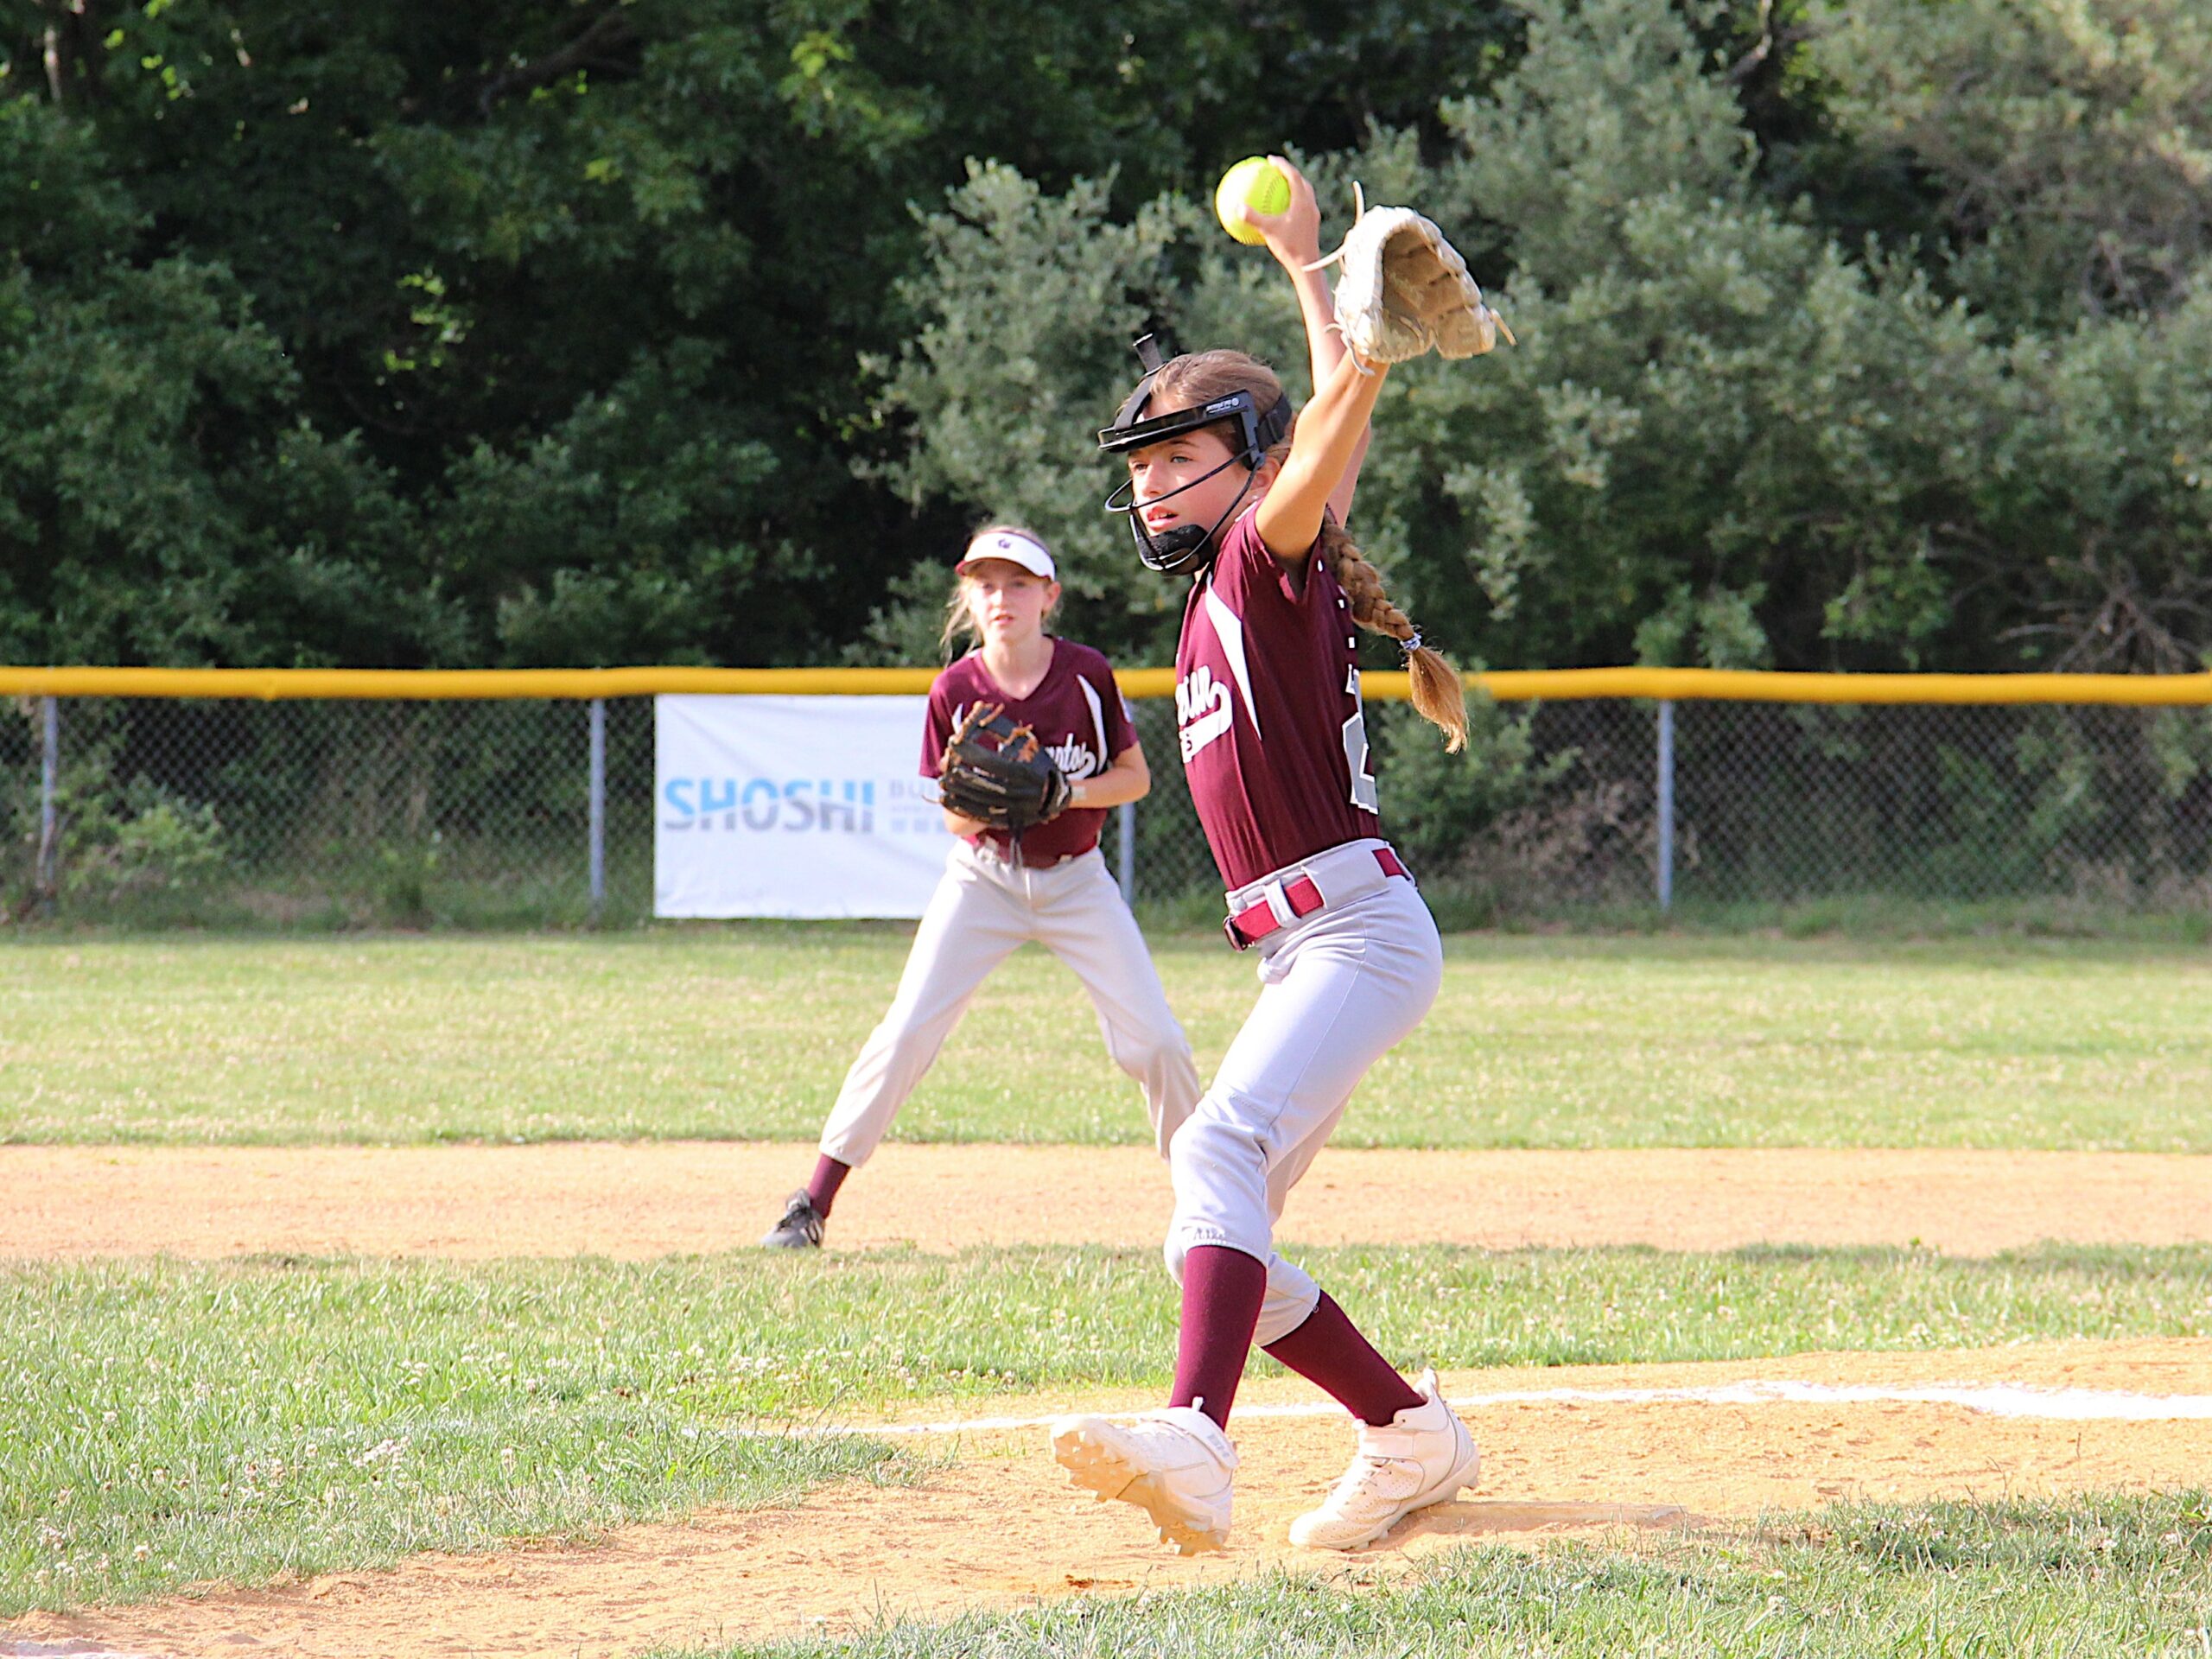 Ella Field pitching for East Hampton. KYRIL BROMLEY